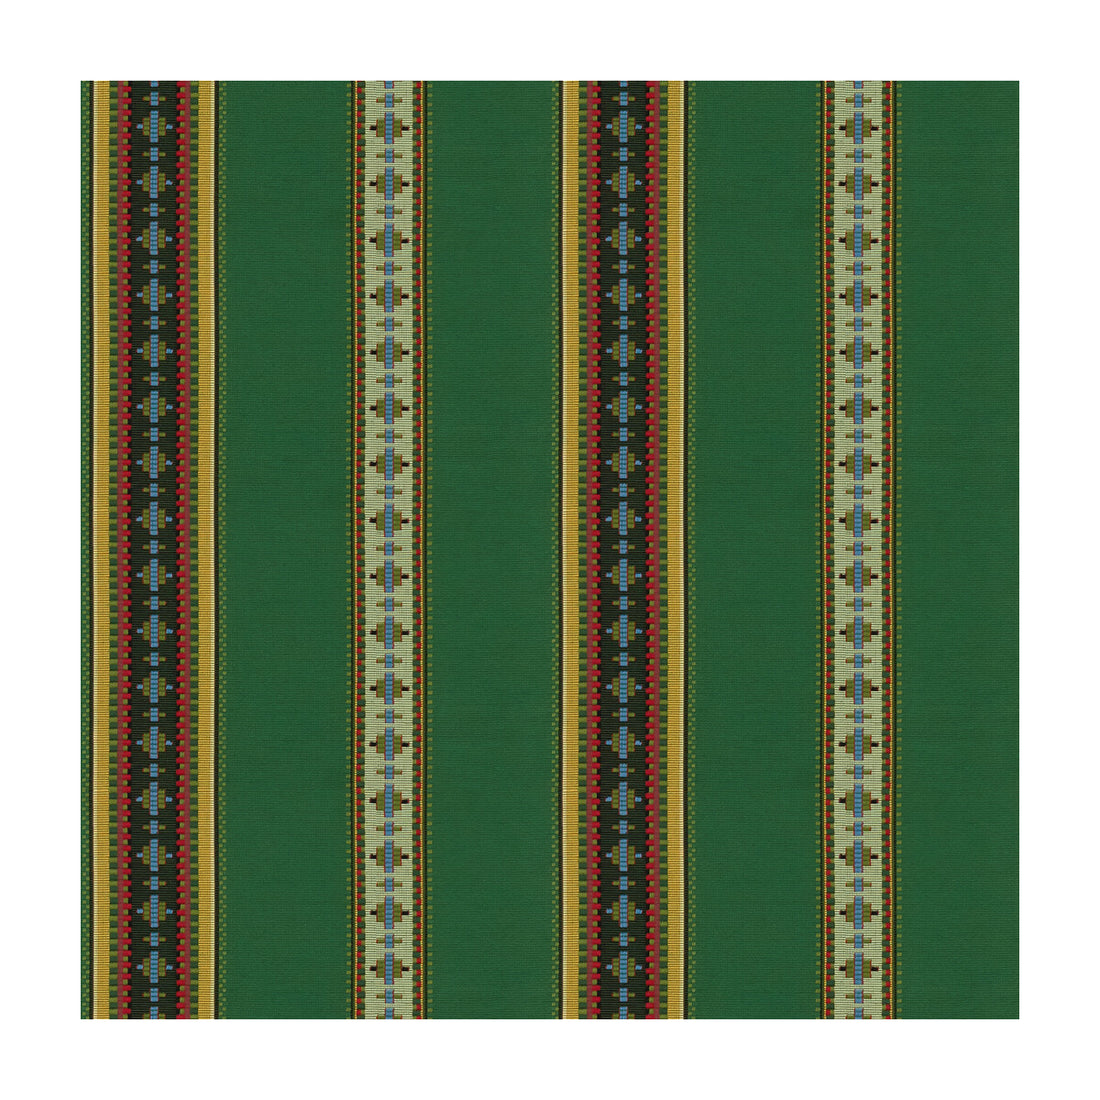 Rayure Broderie fabric in vert color - pattern 8015147.3.0 - by Brunschwig &amp; Fils in the Madeleine Castaing collection